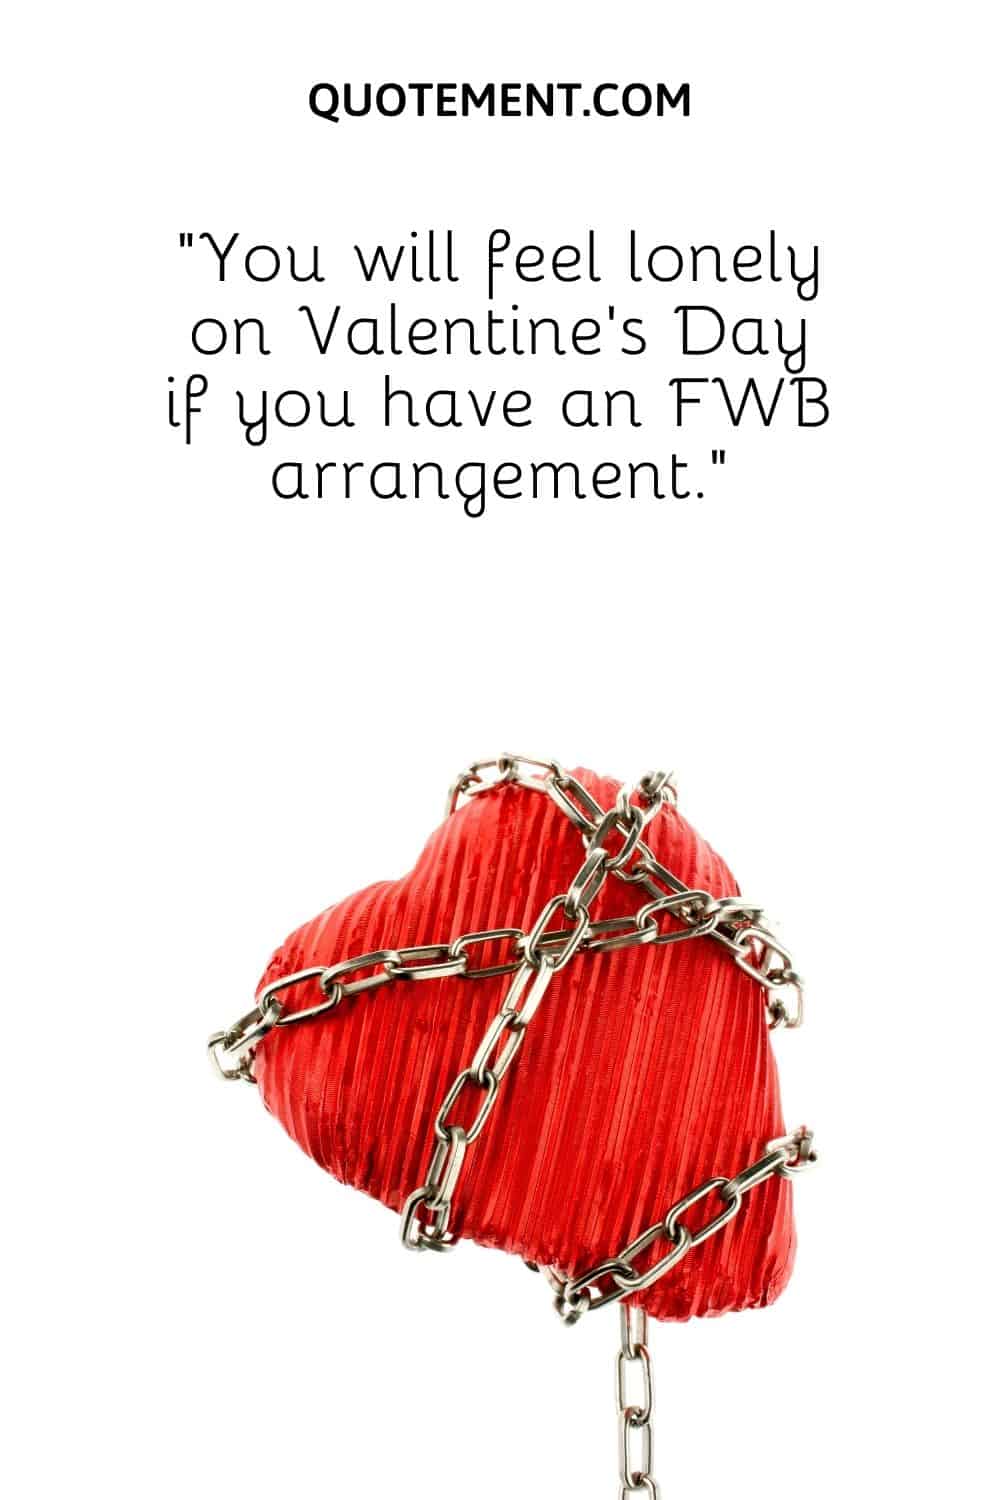 “You will feel lonely on Valentine’s Day if you have an FWB arrangement.”